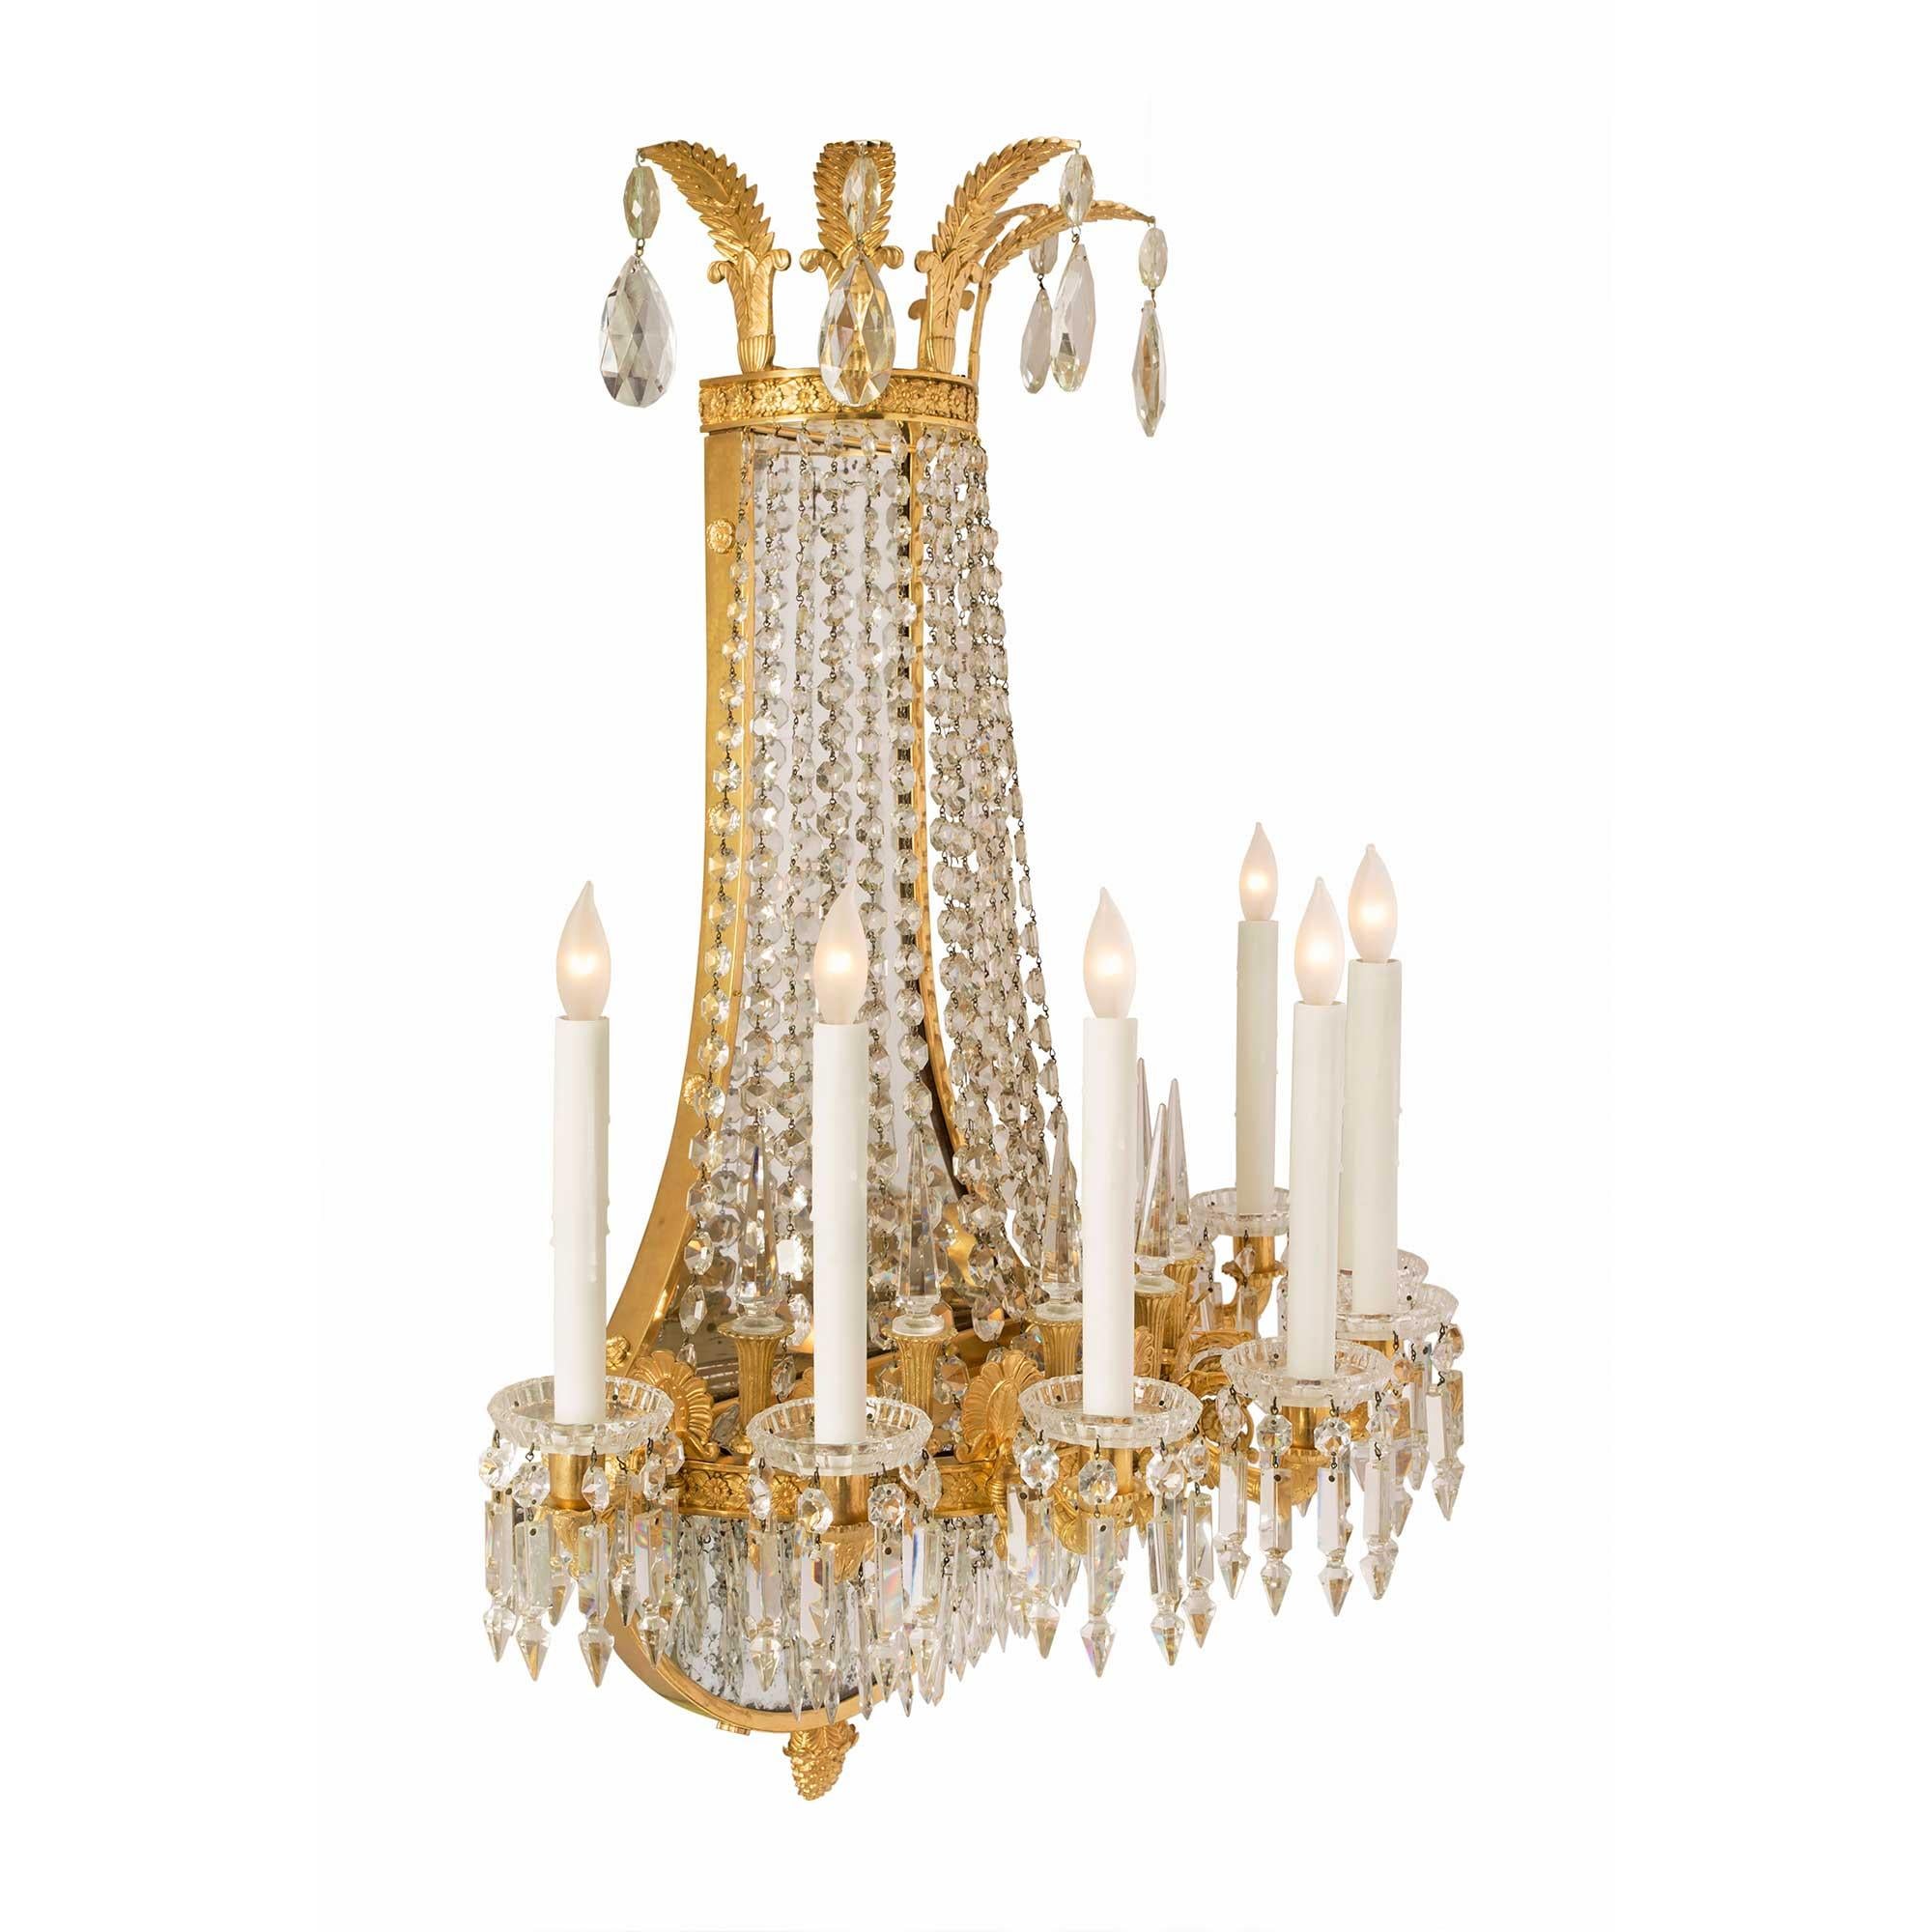 A stunning and monumental pair of French 19th century neo-classical st. ormolu and crystal seven arm, nine-light sconces, signed Baccarat. Each lyre shape sconce is centered by a finely chased ormolu inverted bottom acorn finial, the original mirror